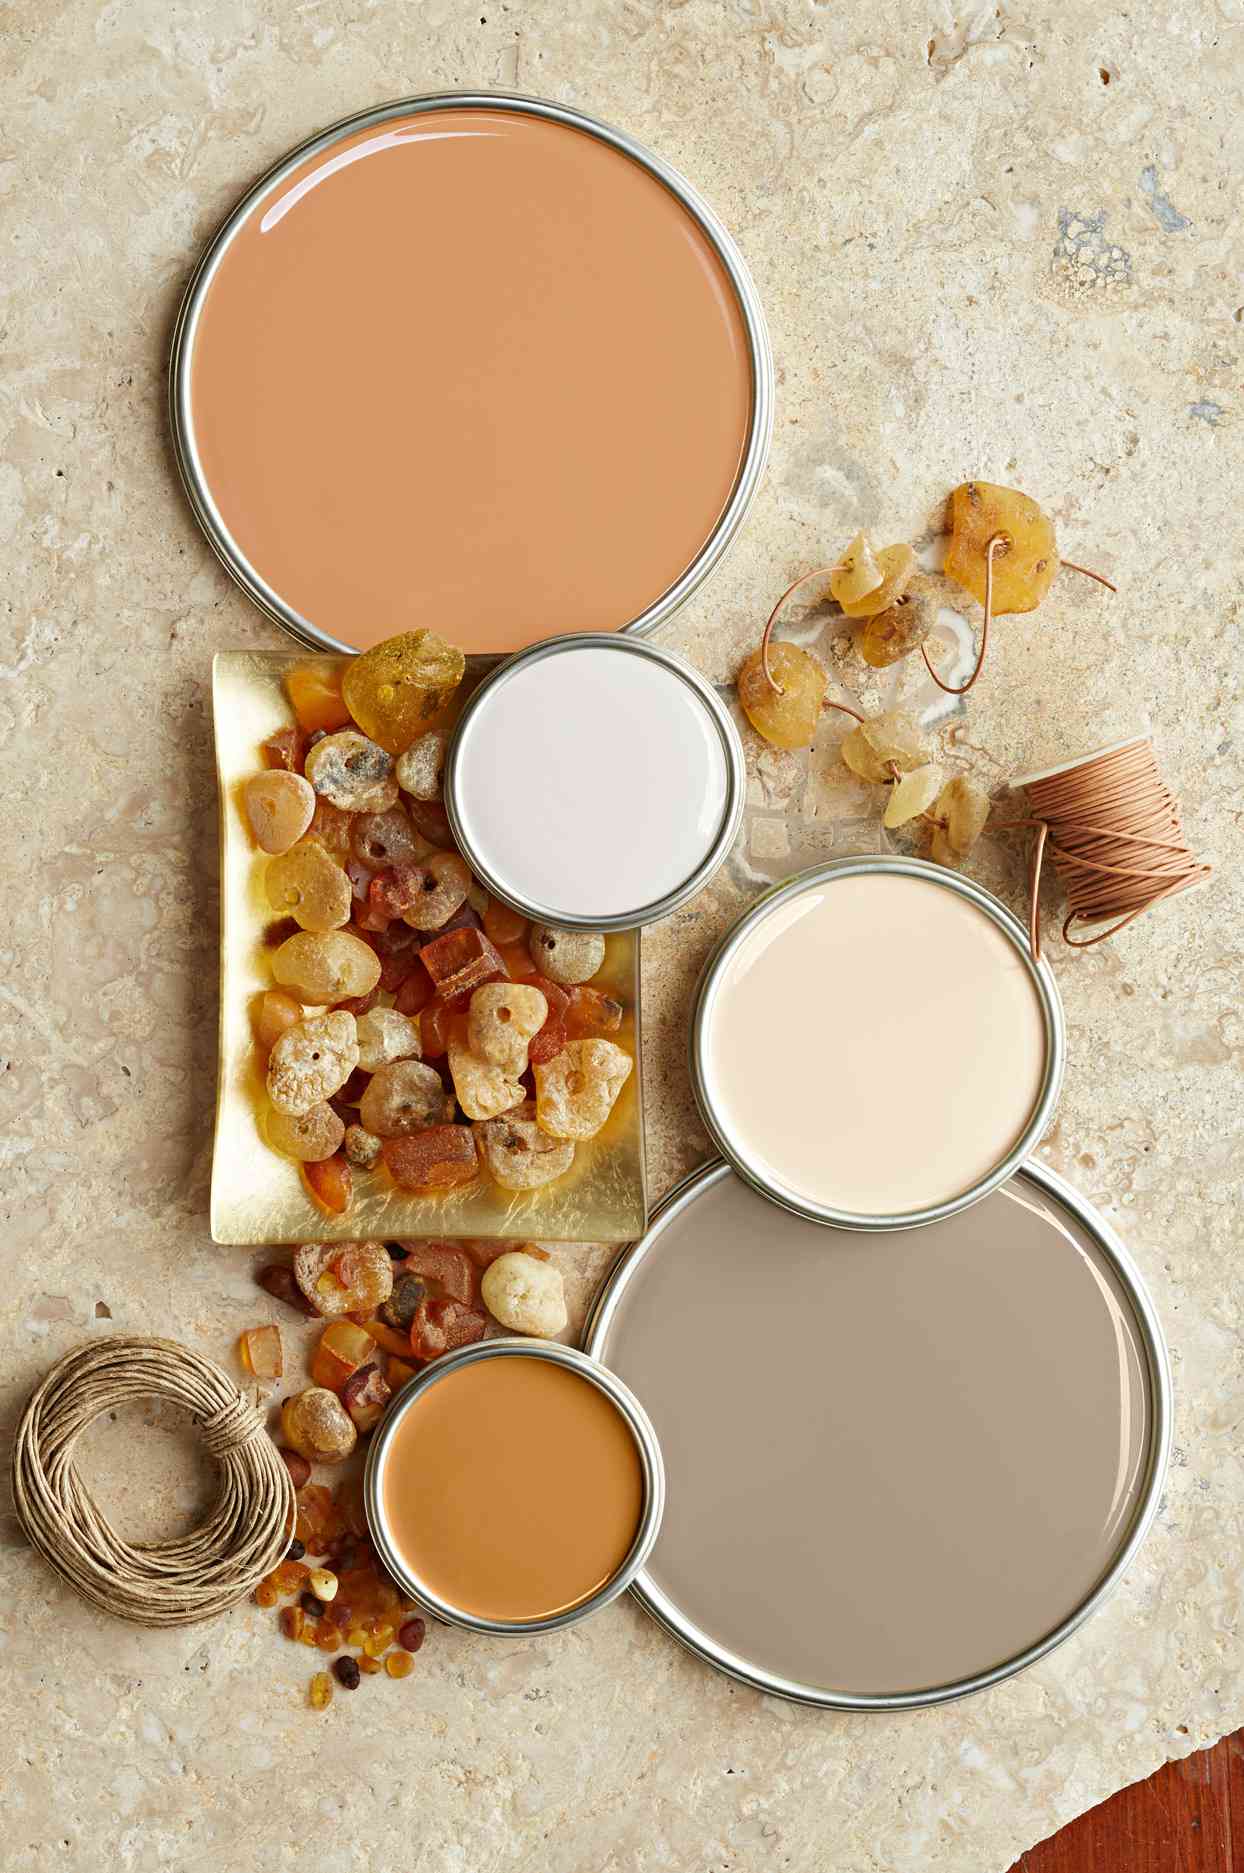 neutral amber colored paint lids